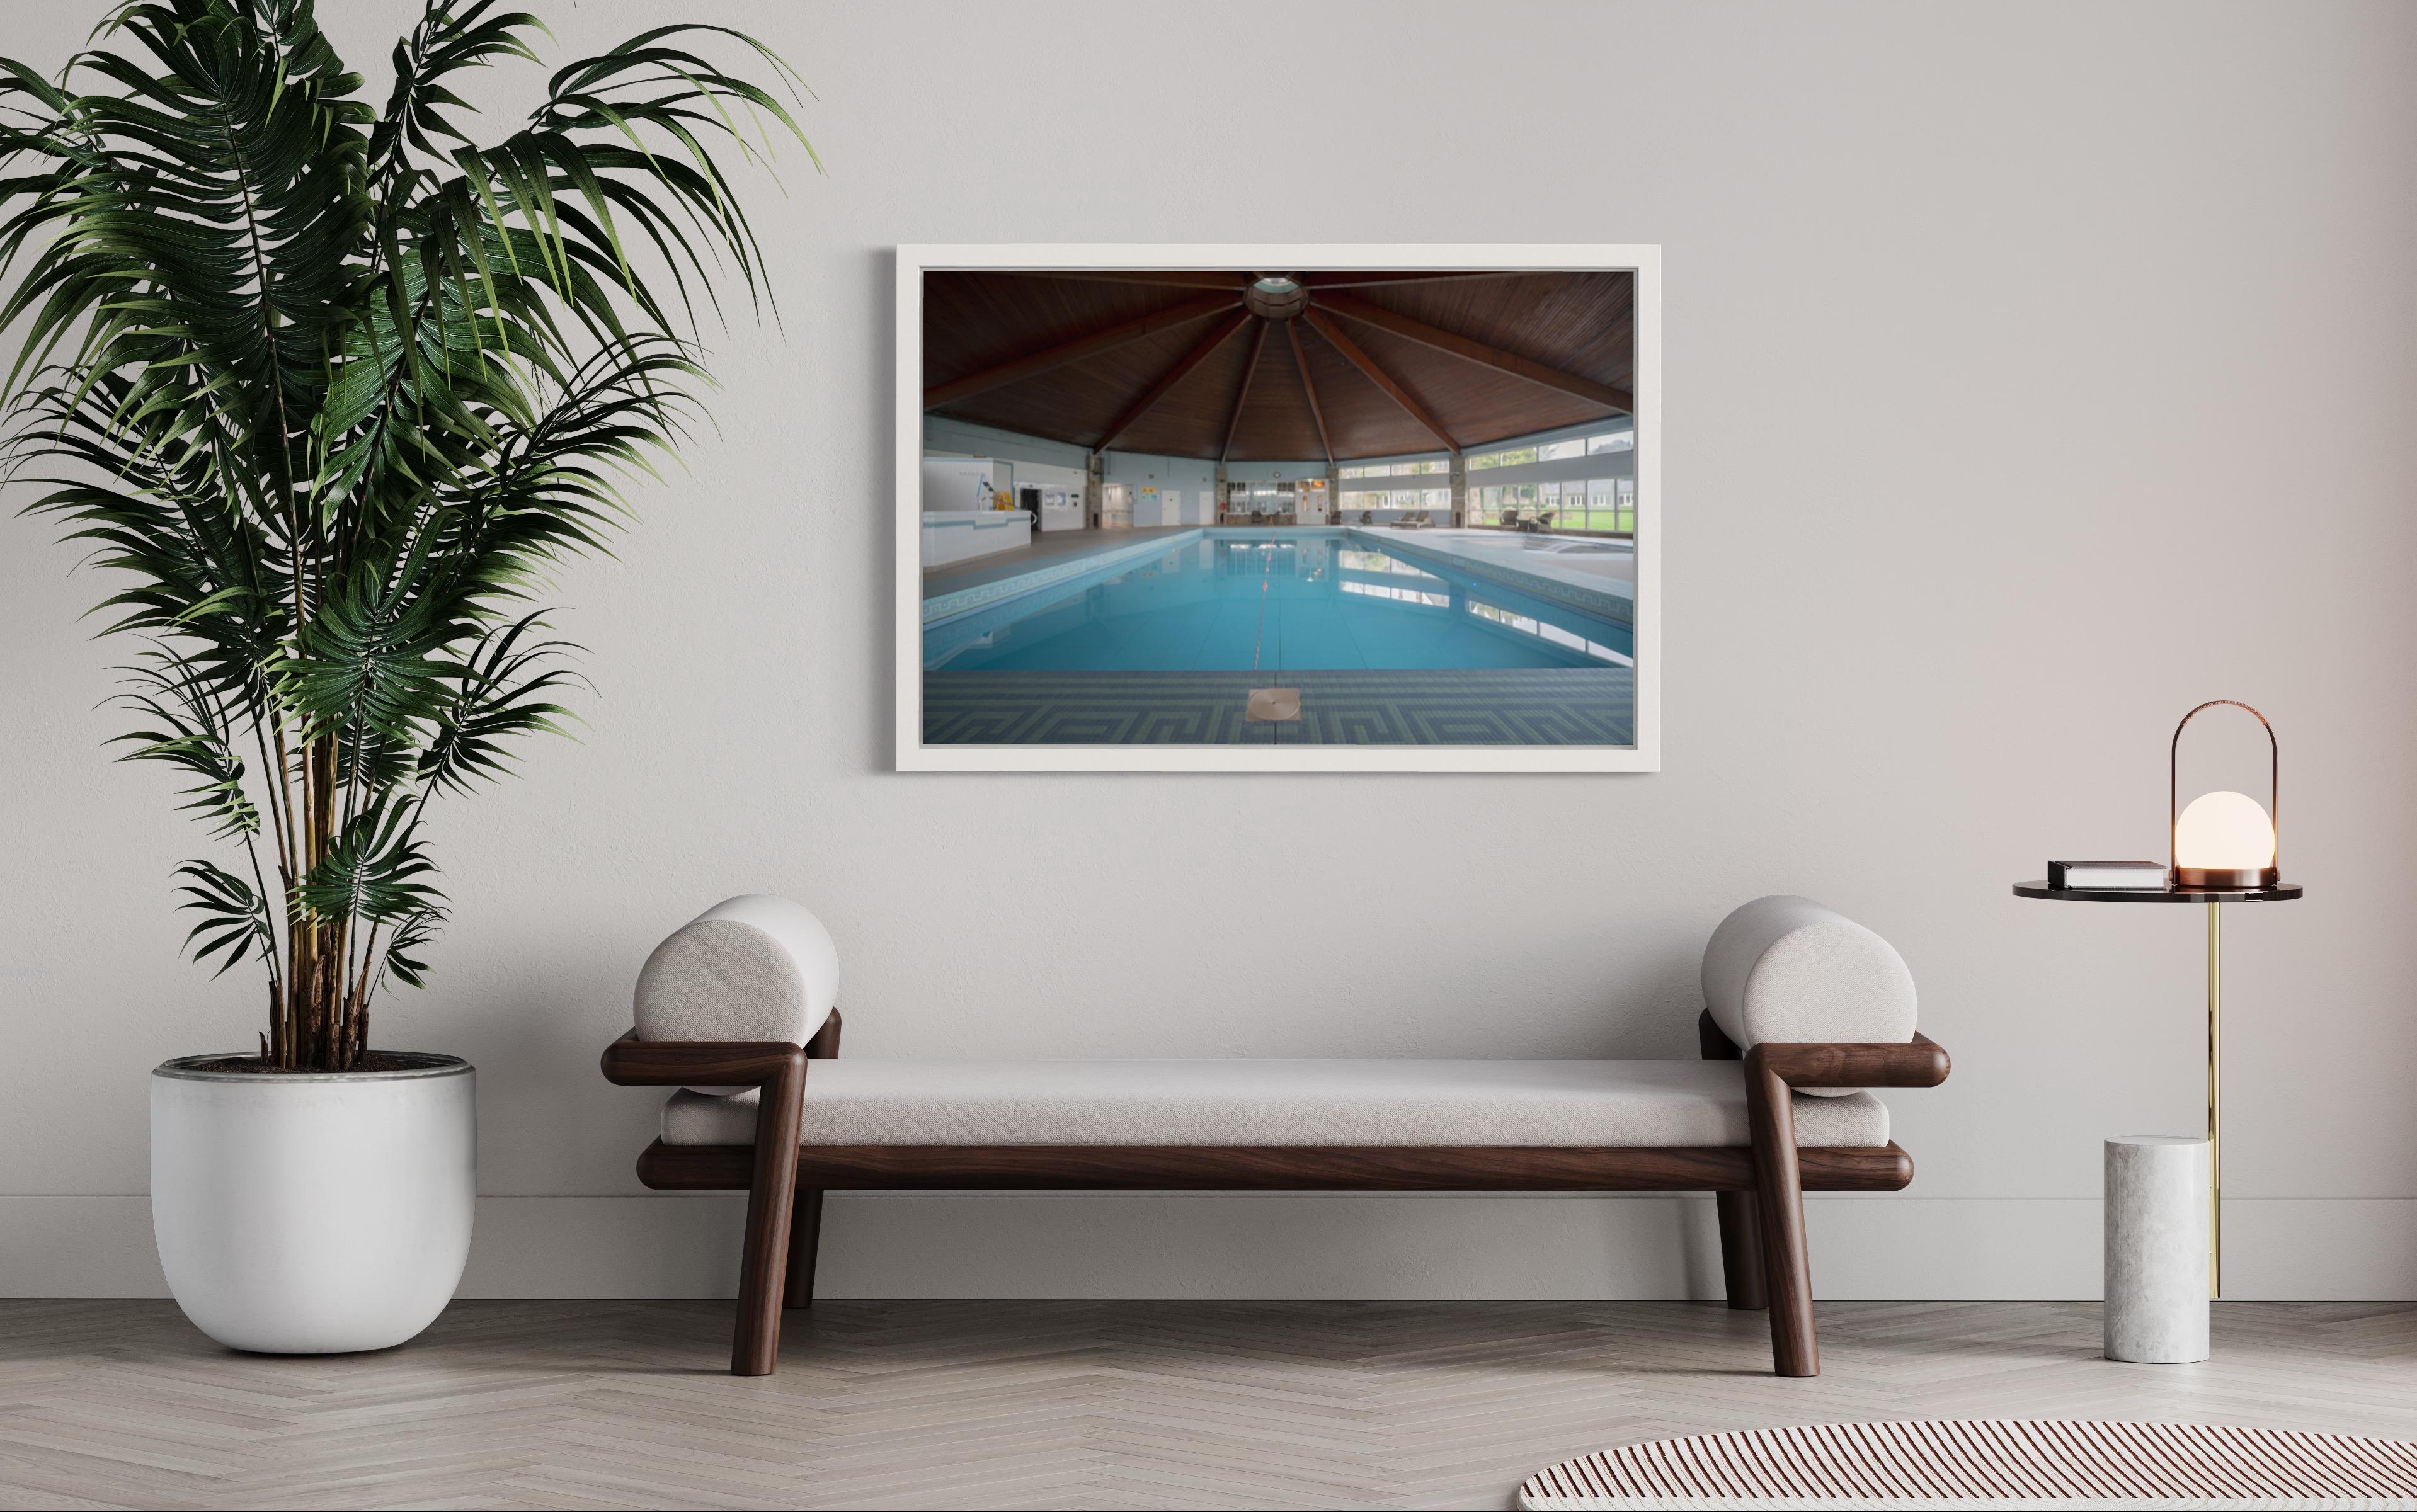 Architectural photo of a pool in a hotel in Wales. White frame, museum glass - Photograph by Anna Dobrovolskaya-Mints